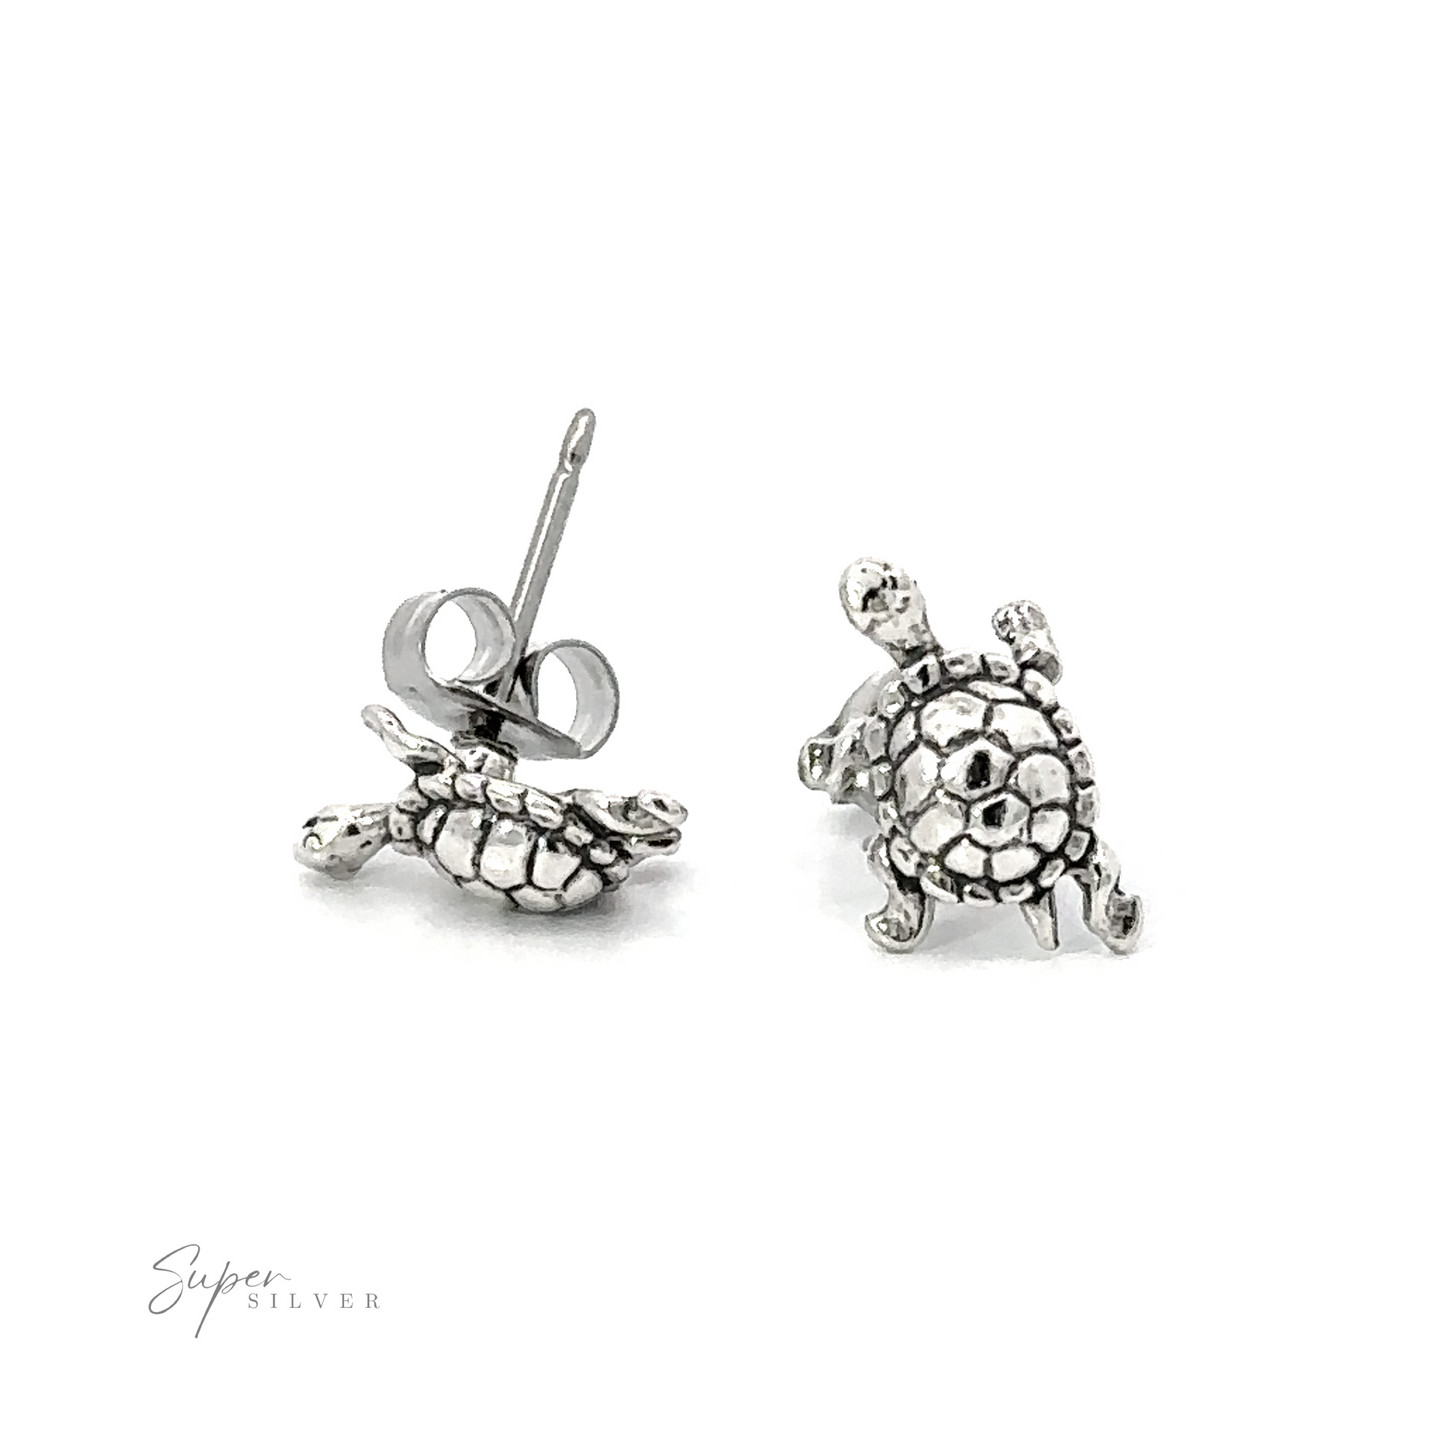 A pair of Turtle Studs.